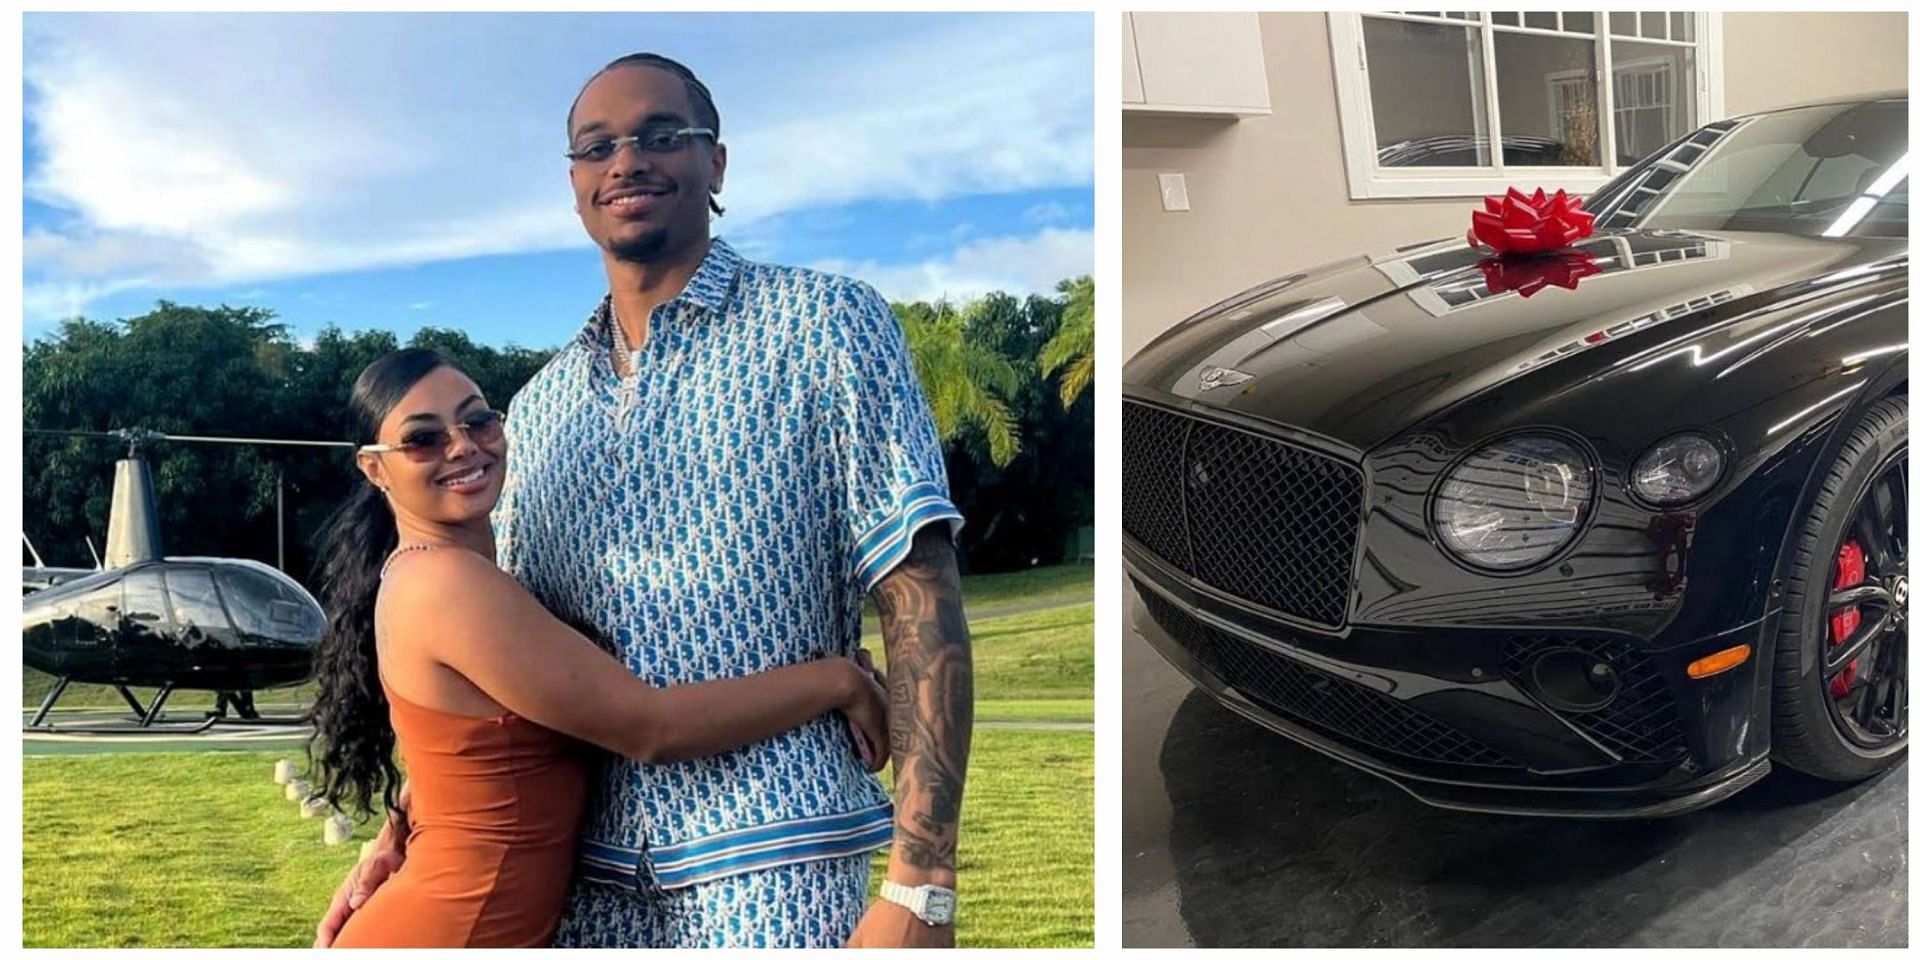 PJ Washington just gifted his fiancee a Bentley Continental GT